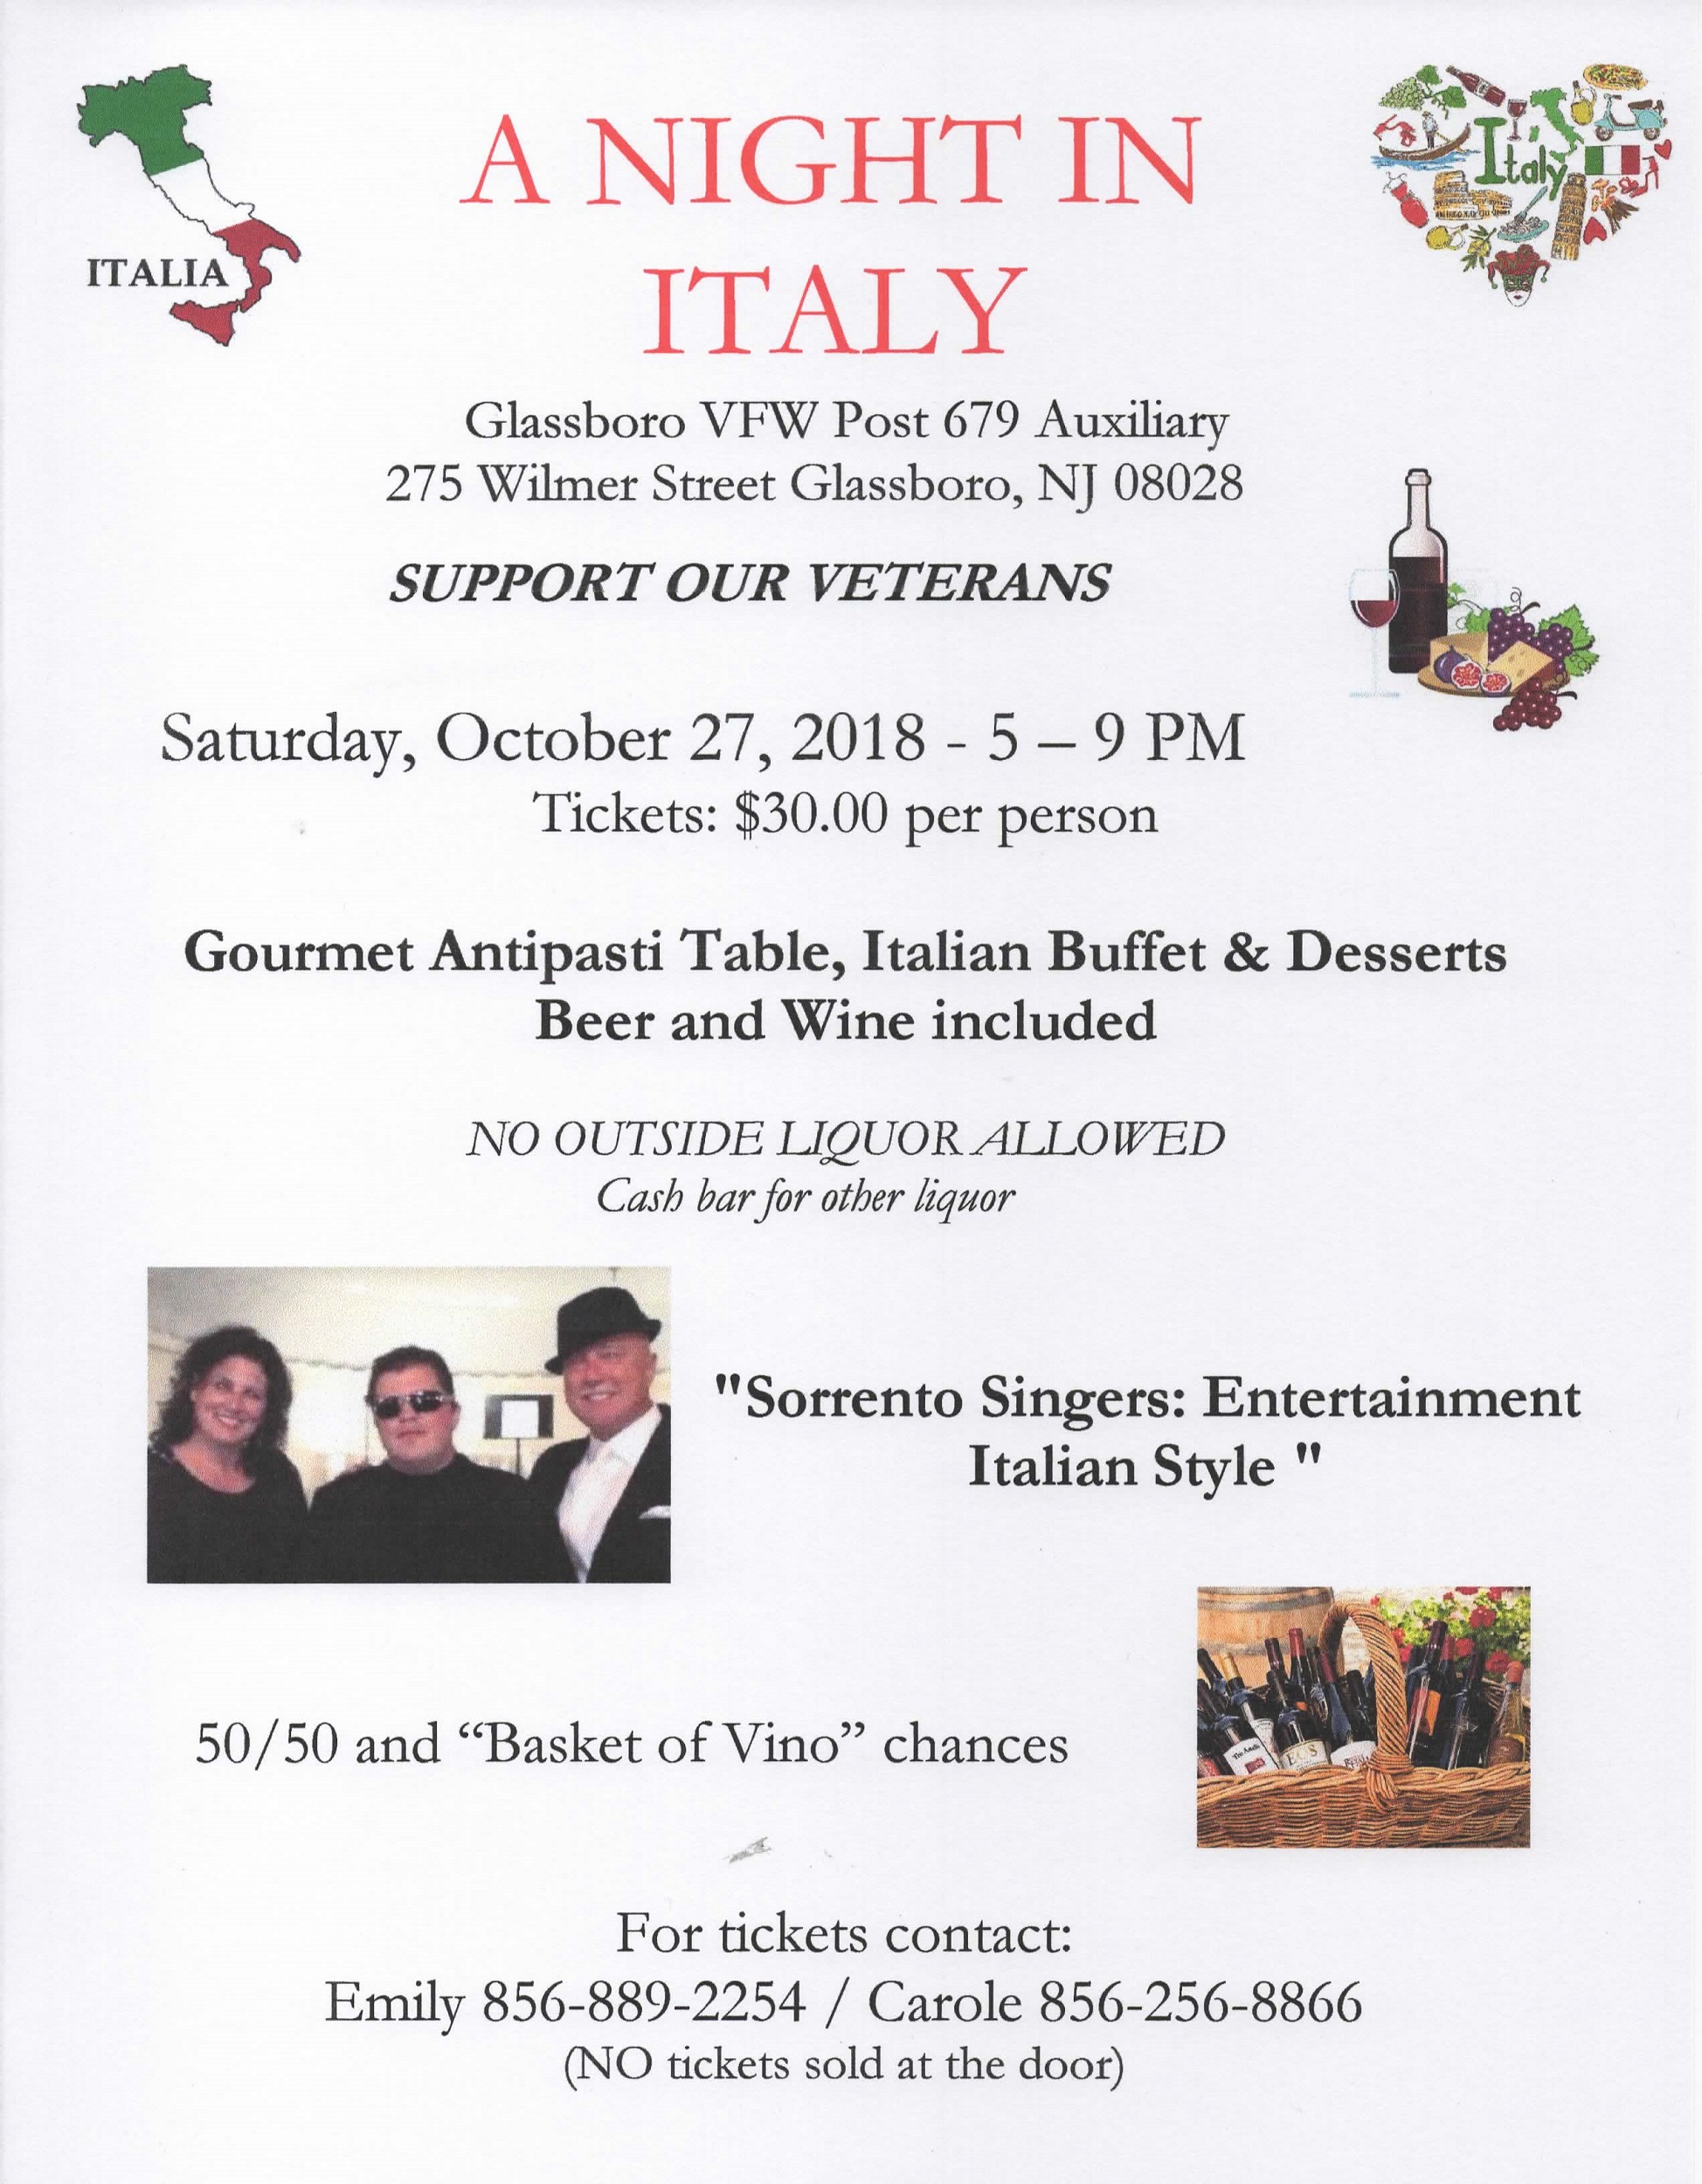 A Night in Italy Dinner Show